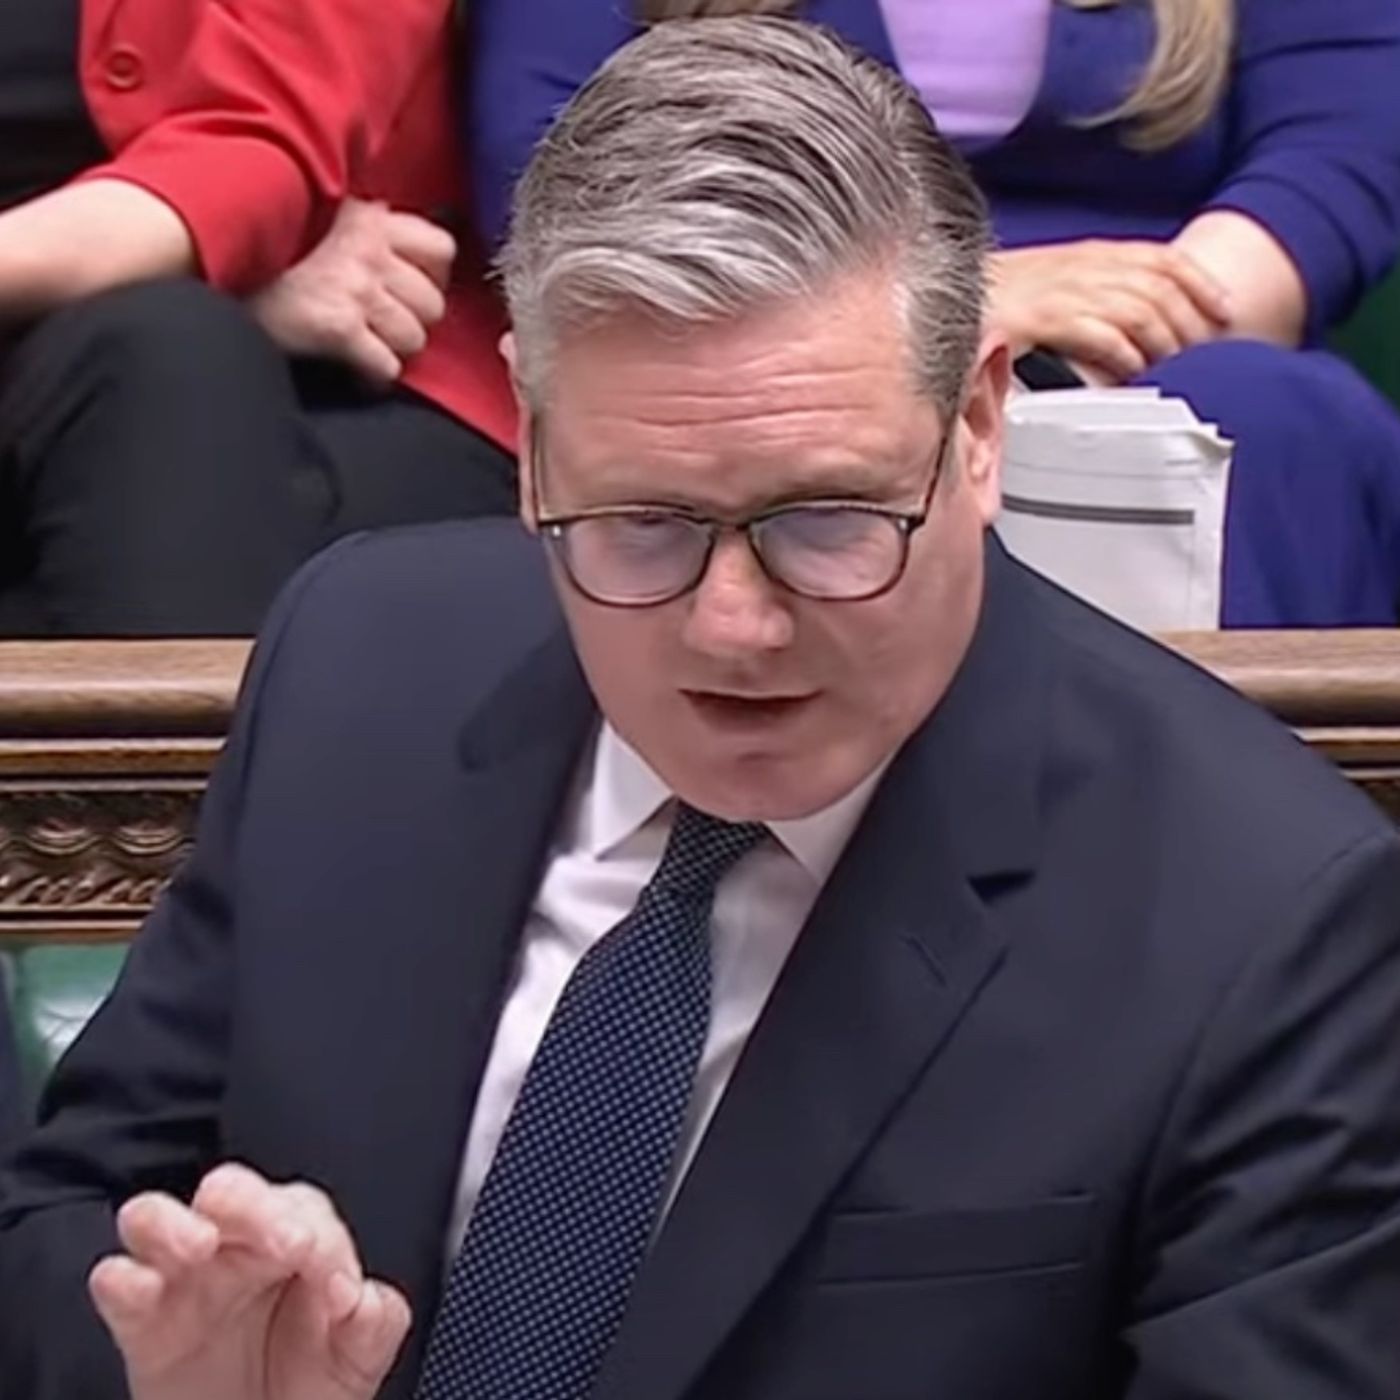 Starmer fluffs his lines at PMQs